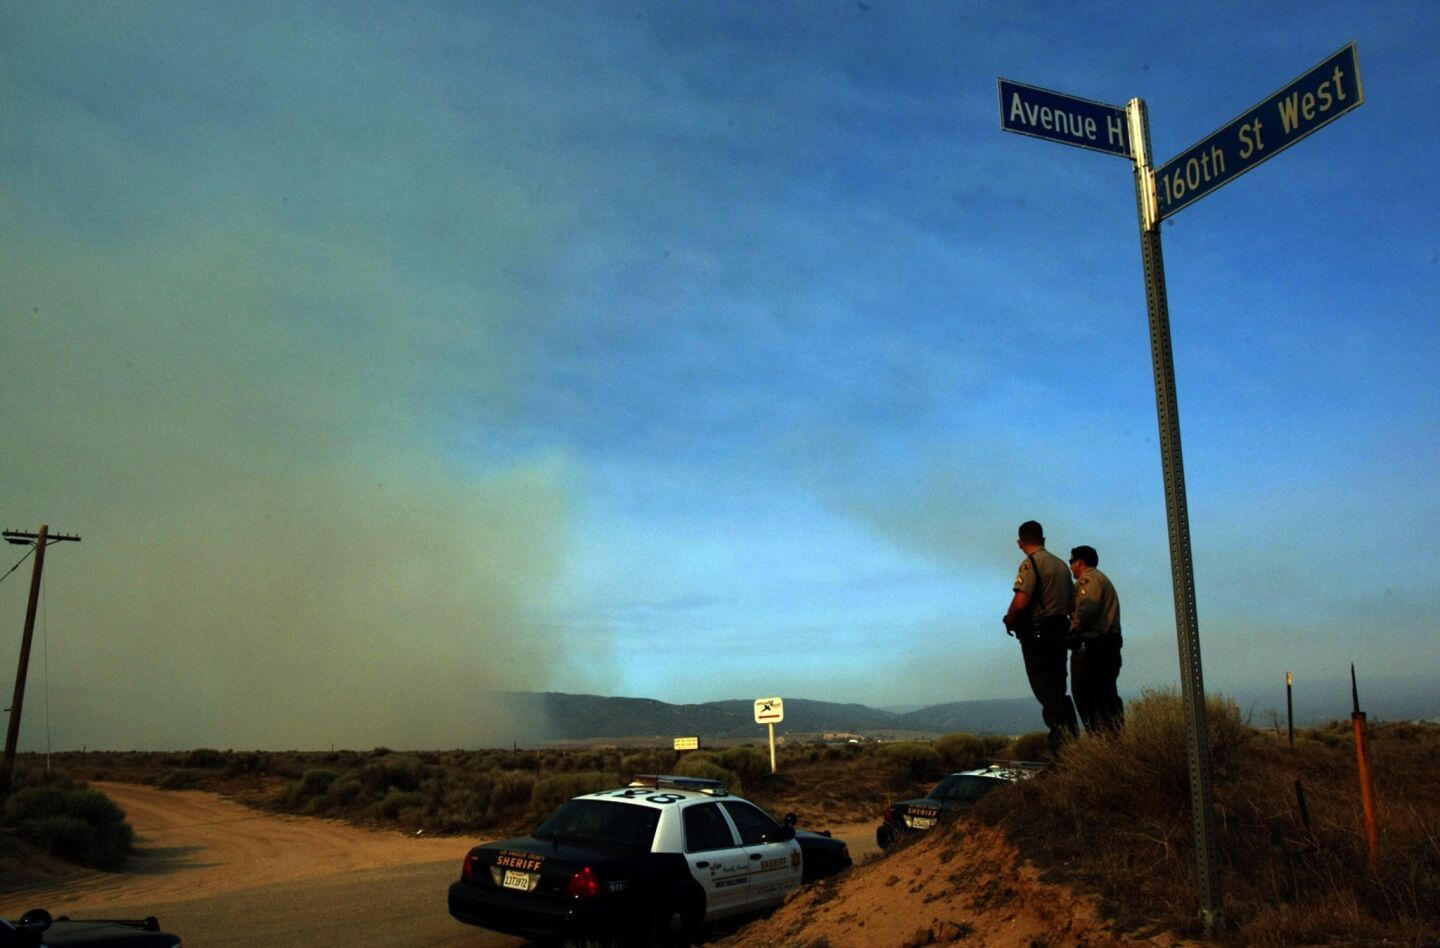 Los Angeles County sheriff's deputies keep an eye on a plume of smoke from the Powerhouse fire along 160th Street West in Lake Hughes.